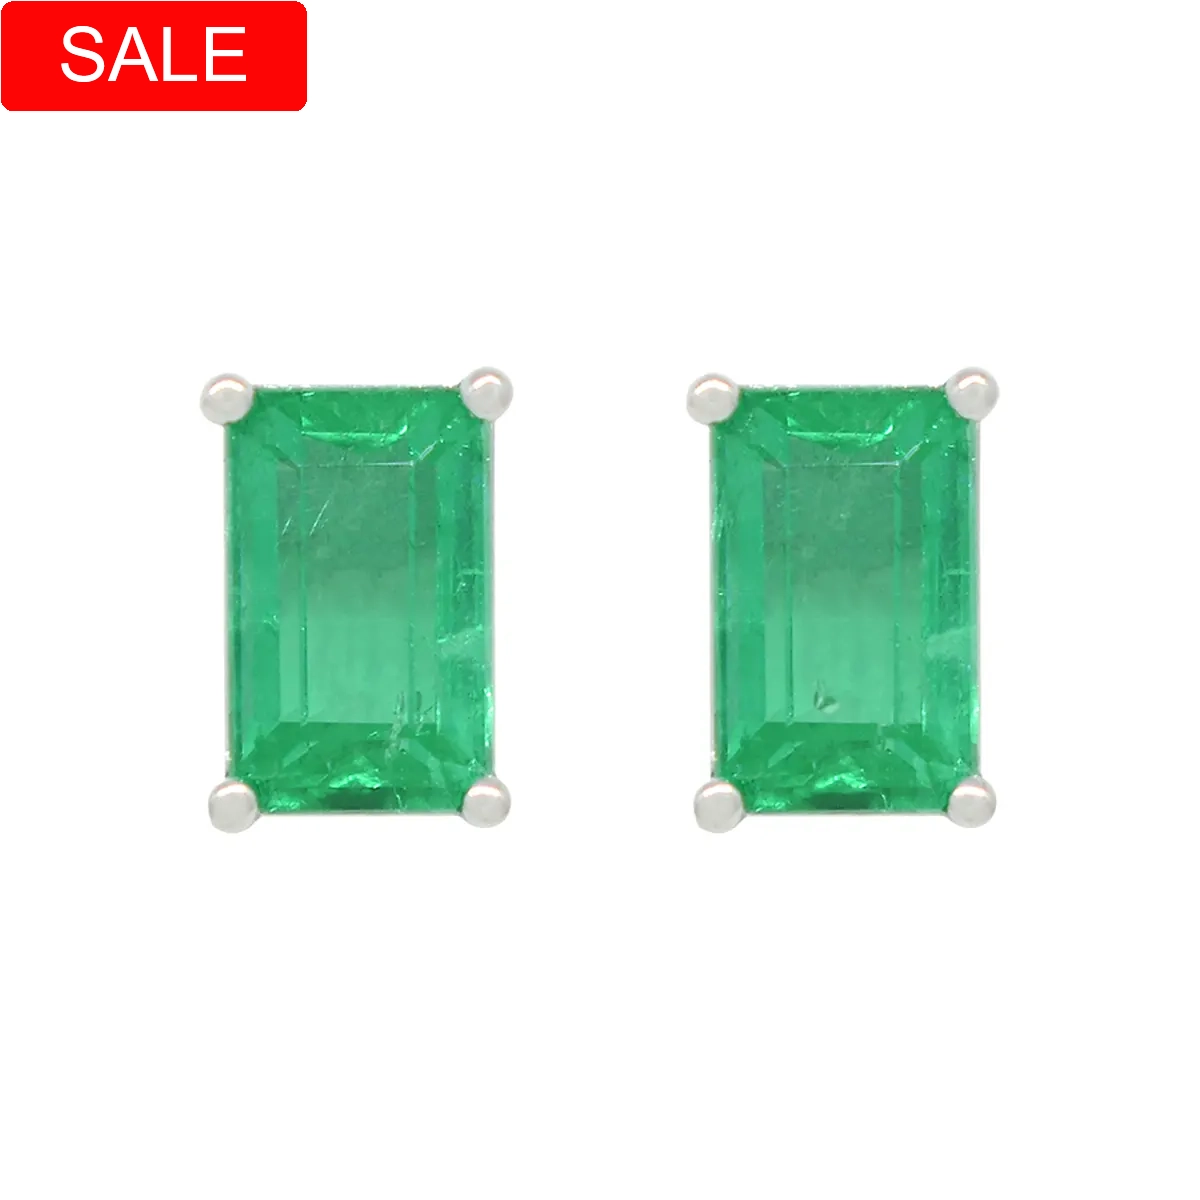 Emerald cut natural Colombian emeralds set in 18K white gold stud earrings in classic 4 prongs minimalist style